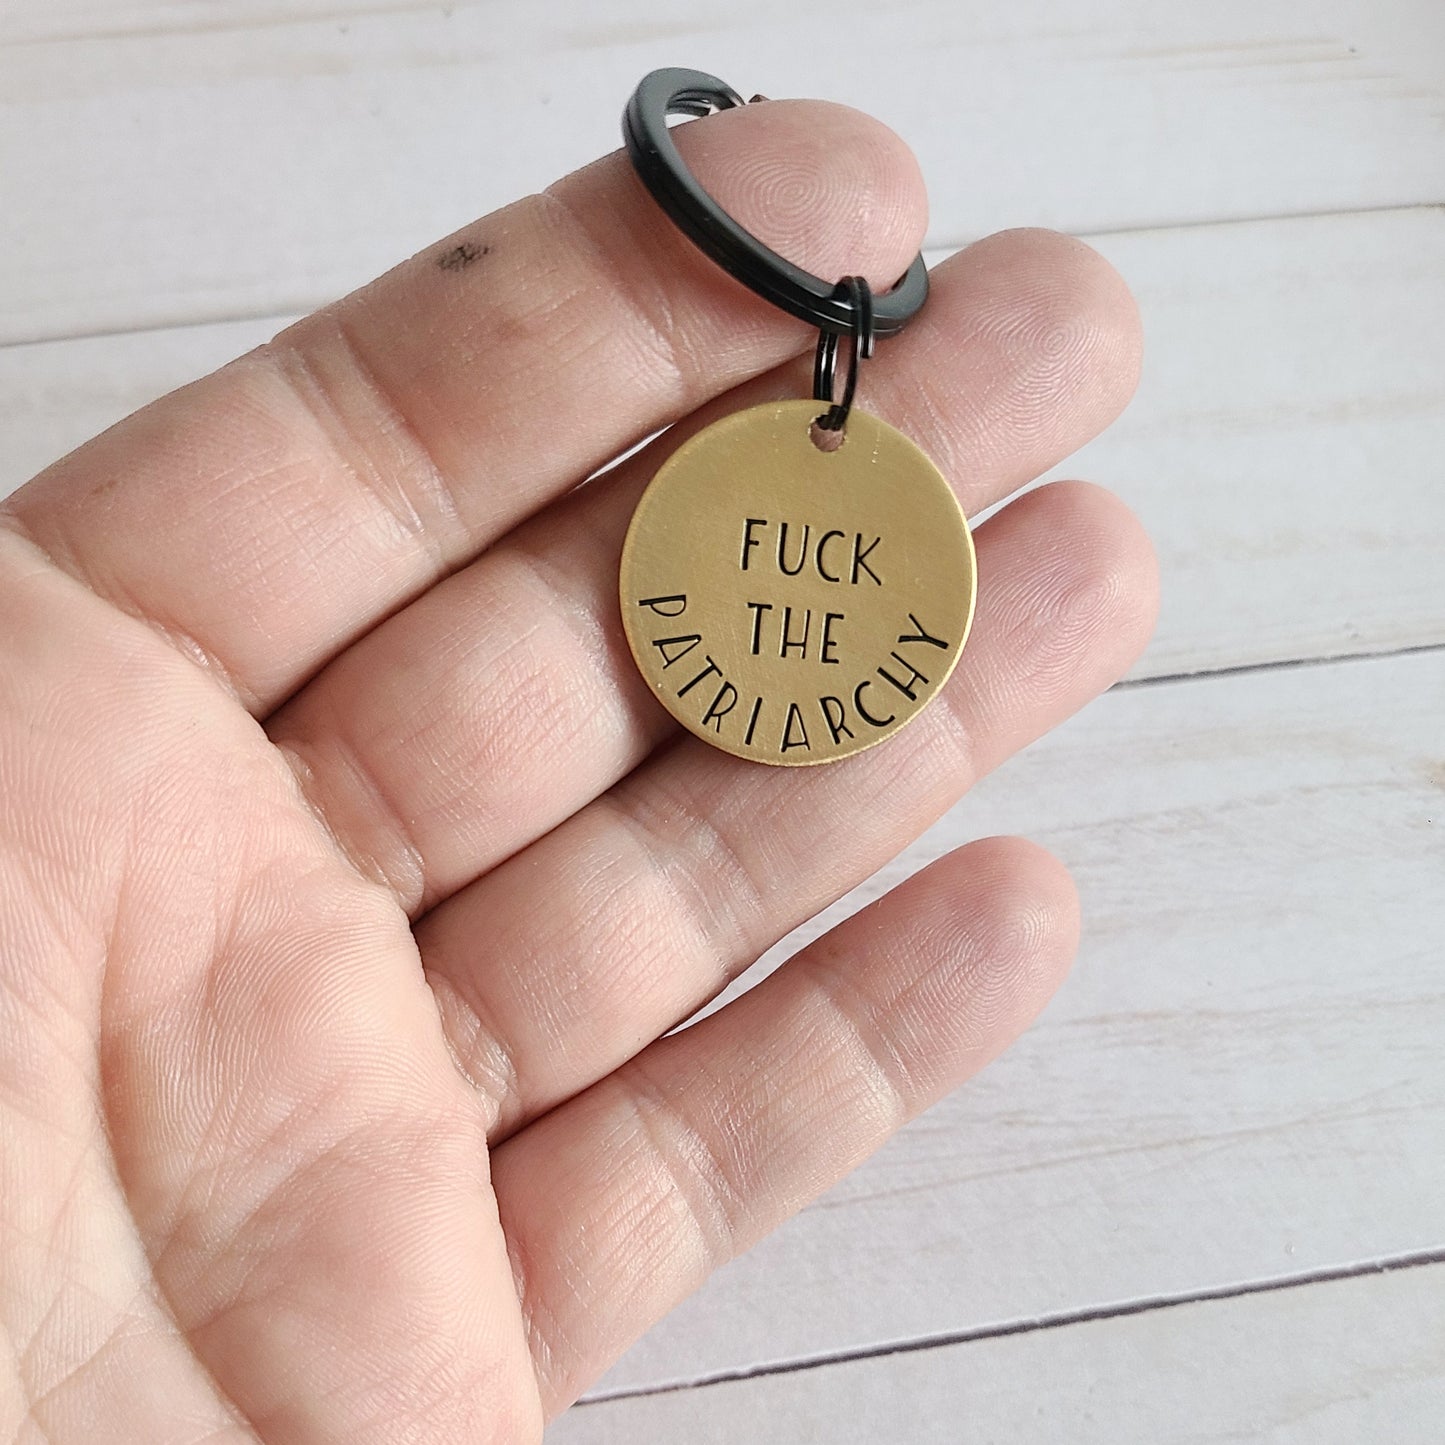 Fuck The Patriarchy Keychain, Brass Feminist Key Chain, Cute Keychains for Women, Liberal Bestie Birthday Gift, Feminism Womens Rights